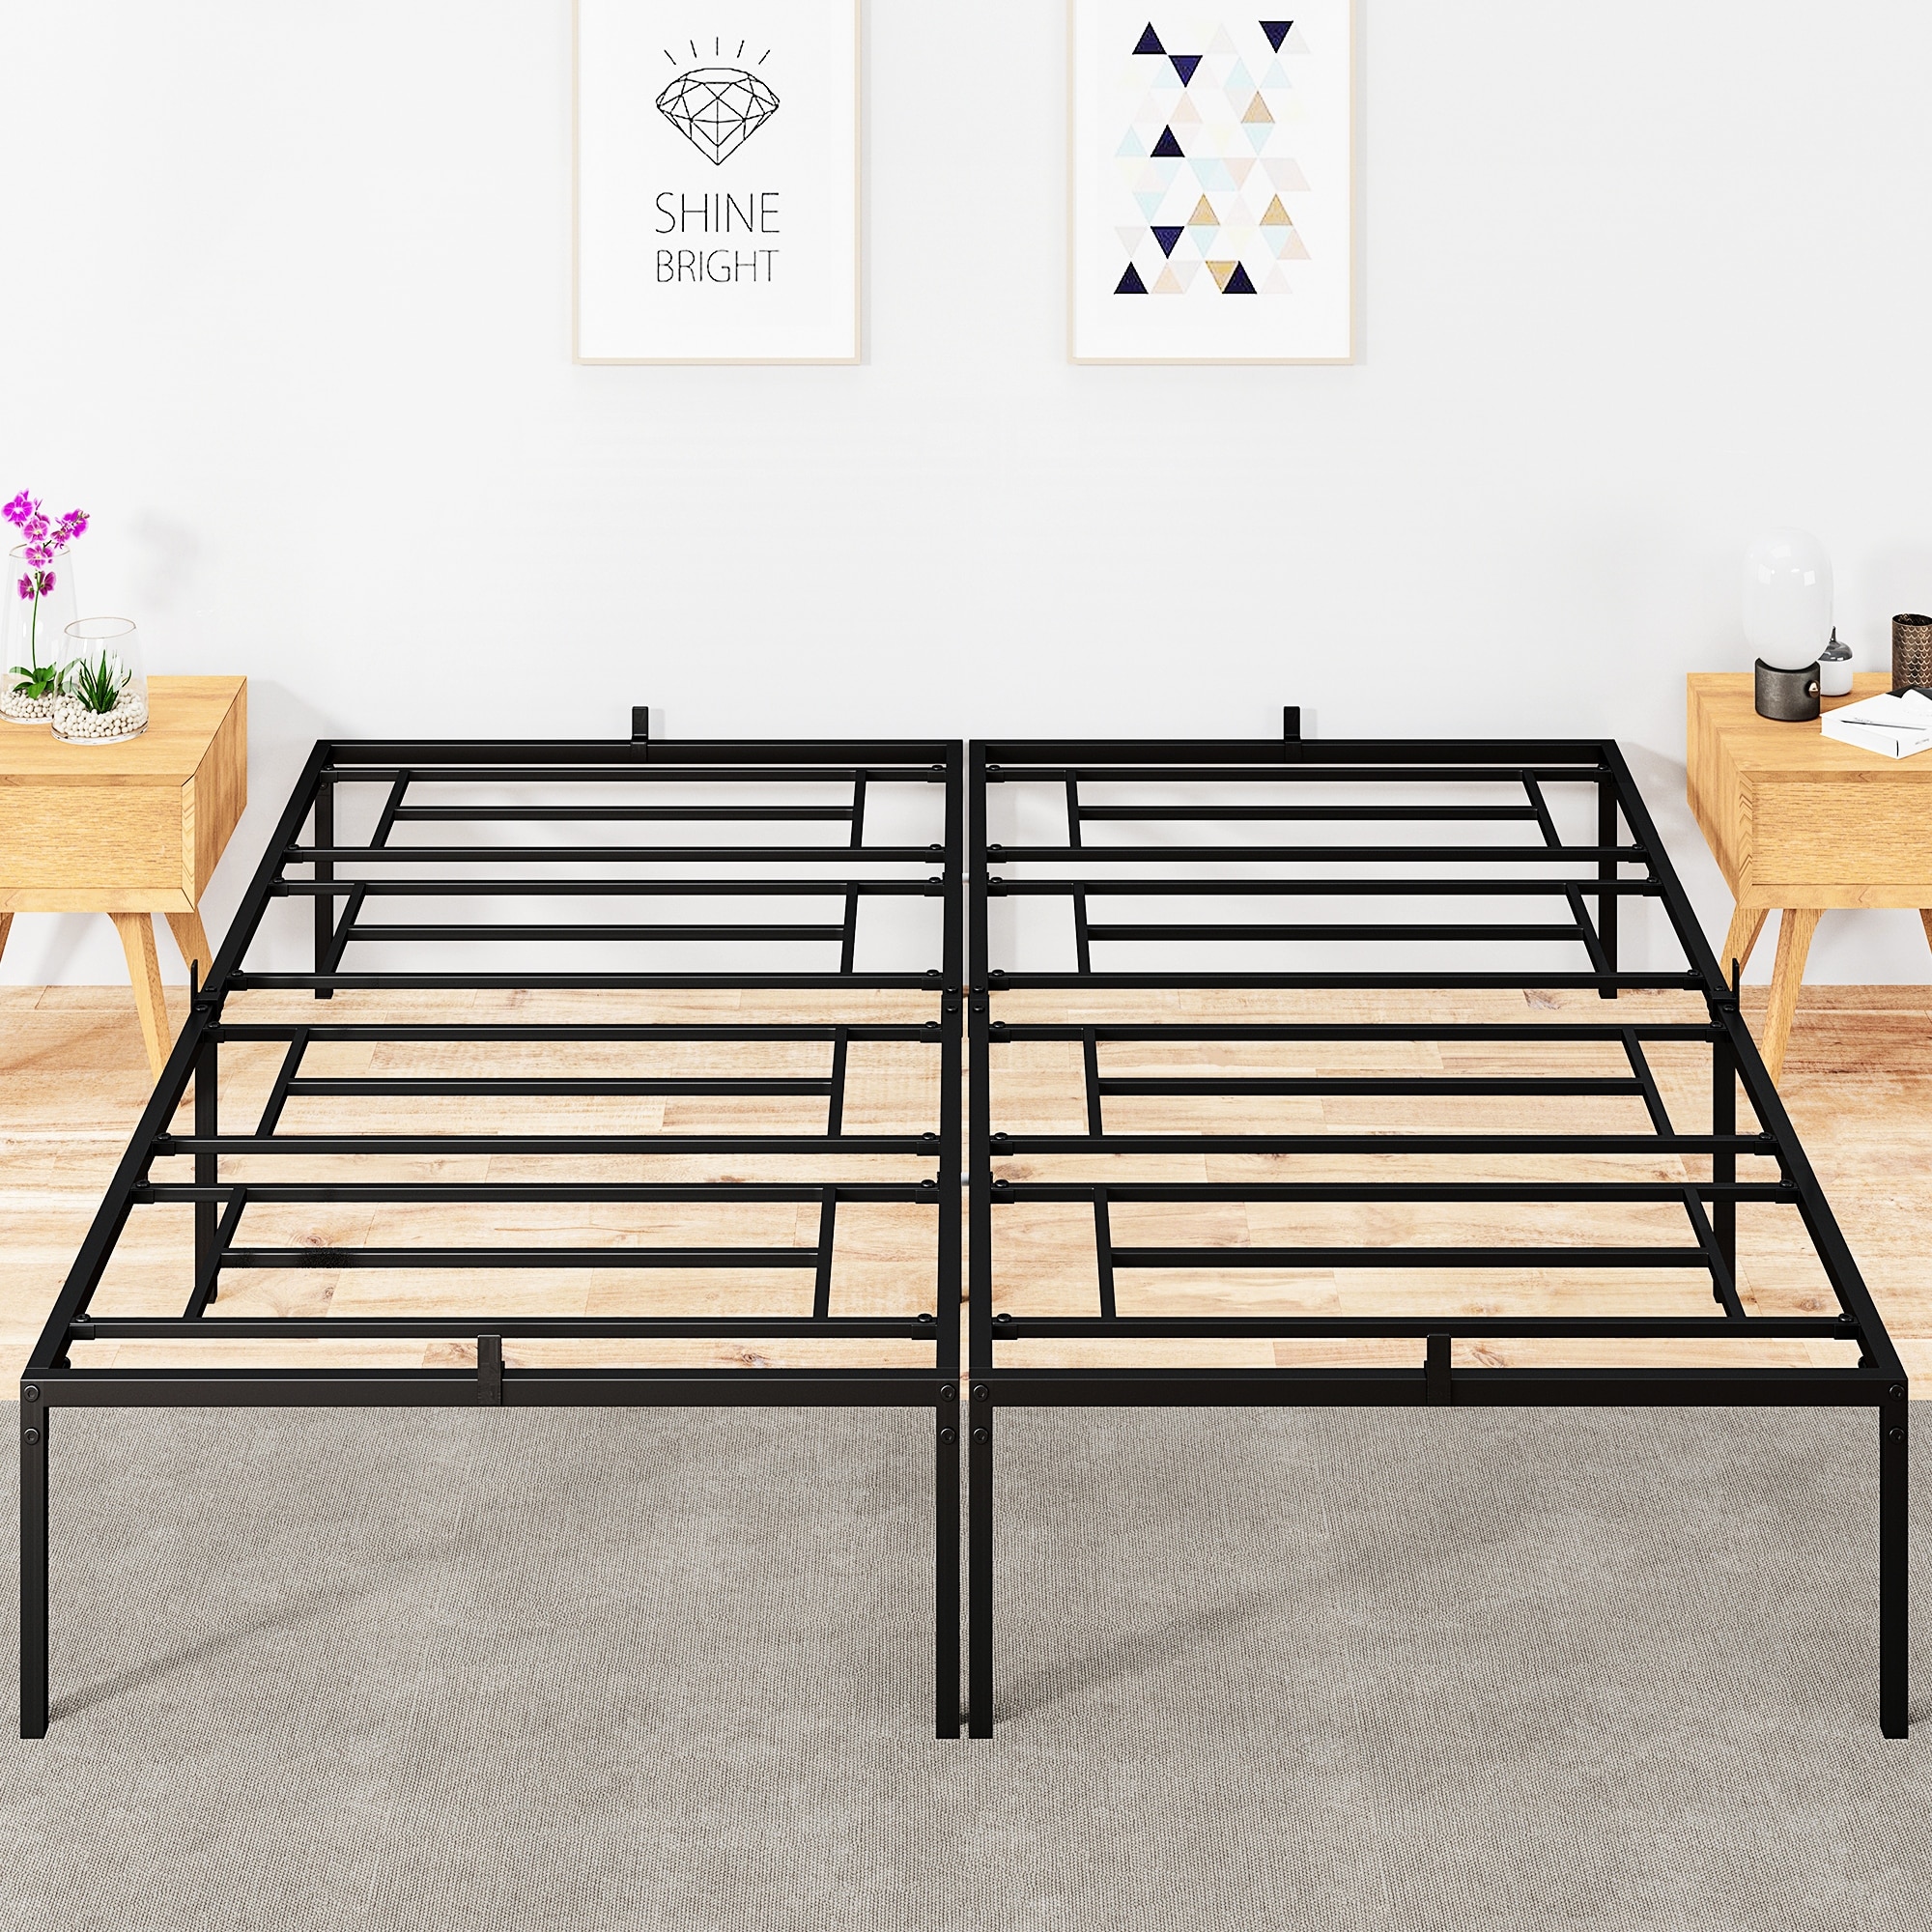 https://ak1.ostkcdn.com/images/products/is/images/direct/c63994856ffd7f6e9dc5ce5ba4c4143839cf891d/Metal-Platform-Bed-Frame-with-Sturdy-Steel-Bed-Slats%2CMattress-Foundation-No-Box-Spring-Needed-Large-Storage-Space.jpg